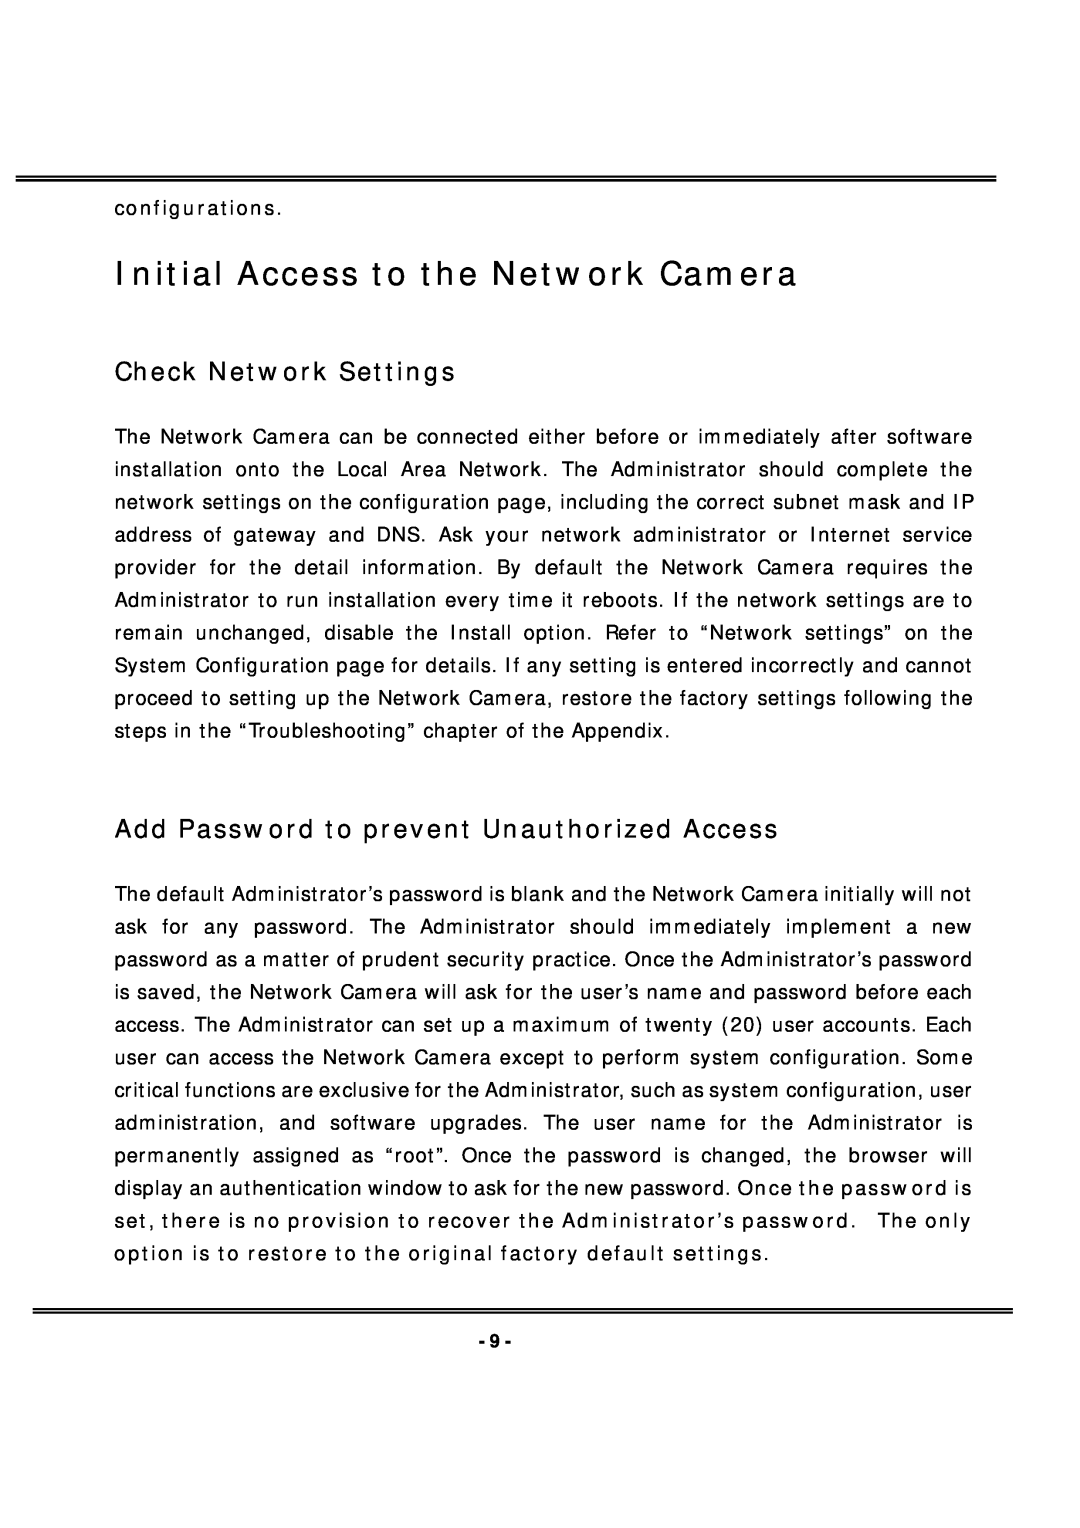 4XEM IPCAMW40 Initial Access to the Network Camera, Check Network Settings, Add Password to prevent Unauthorized Access 